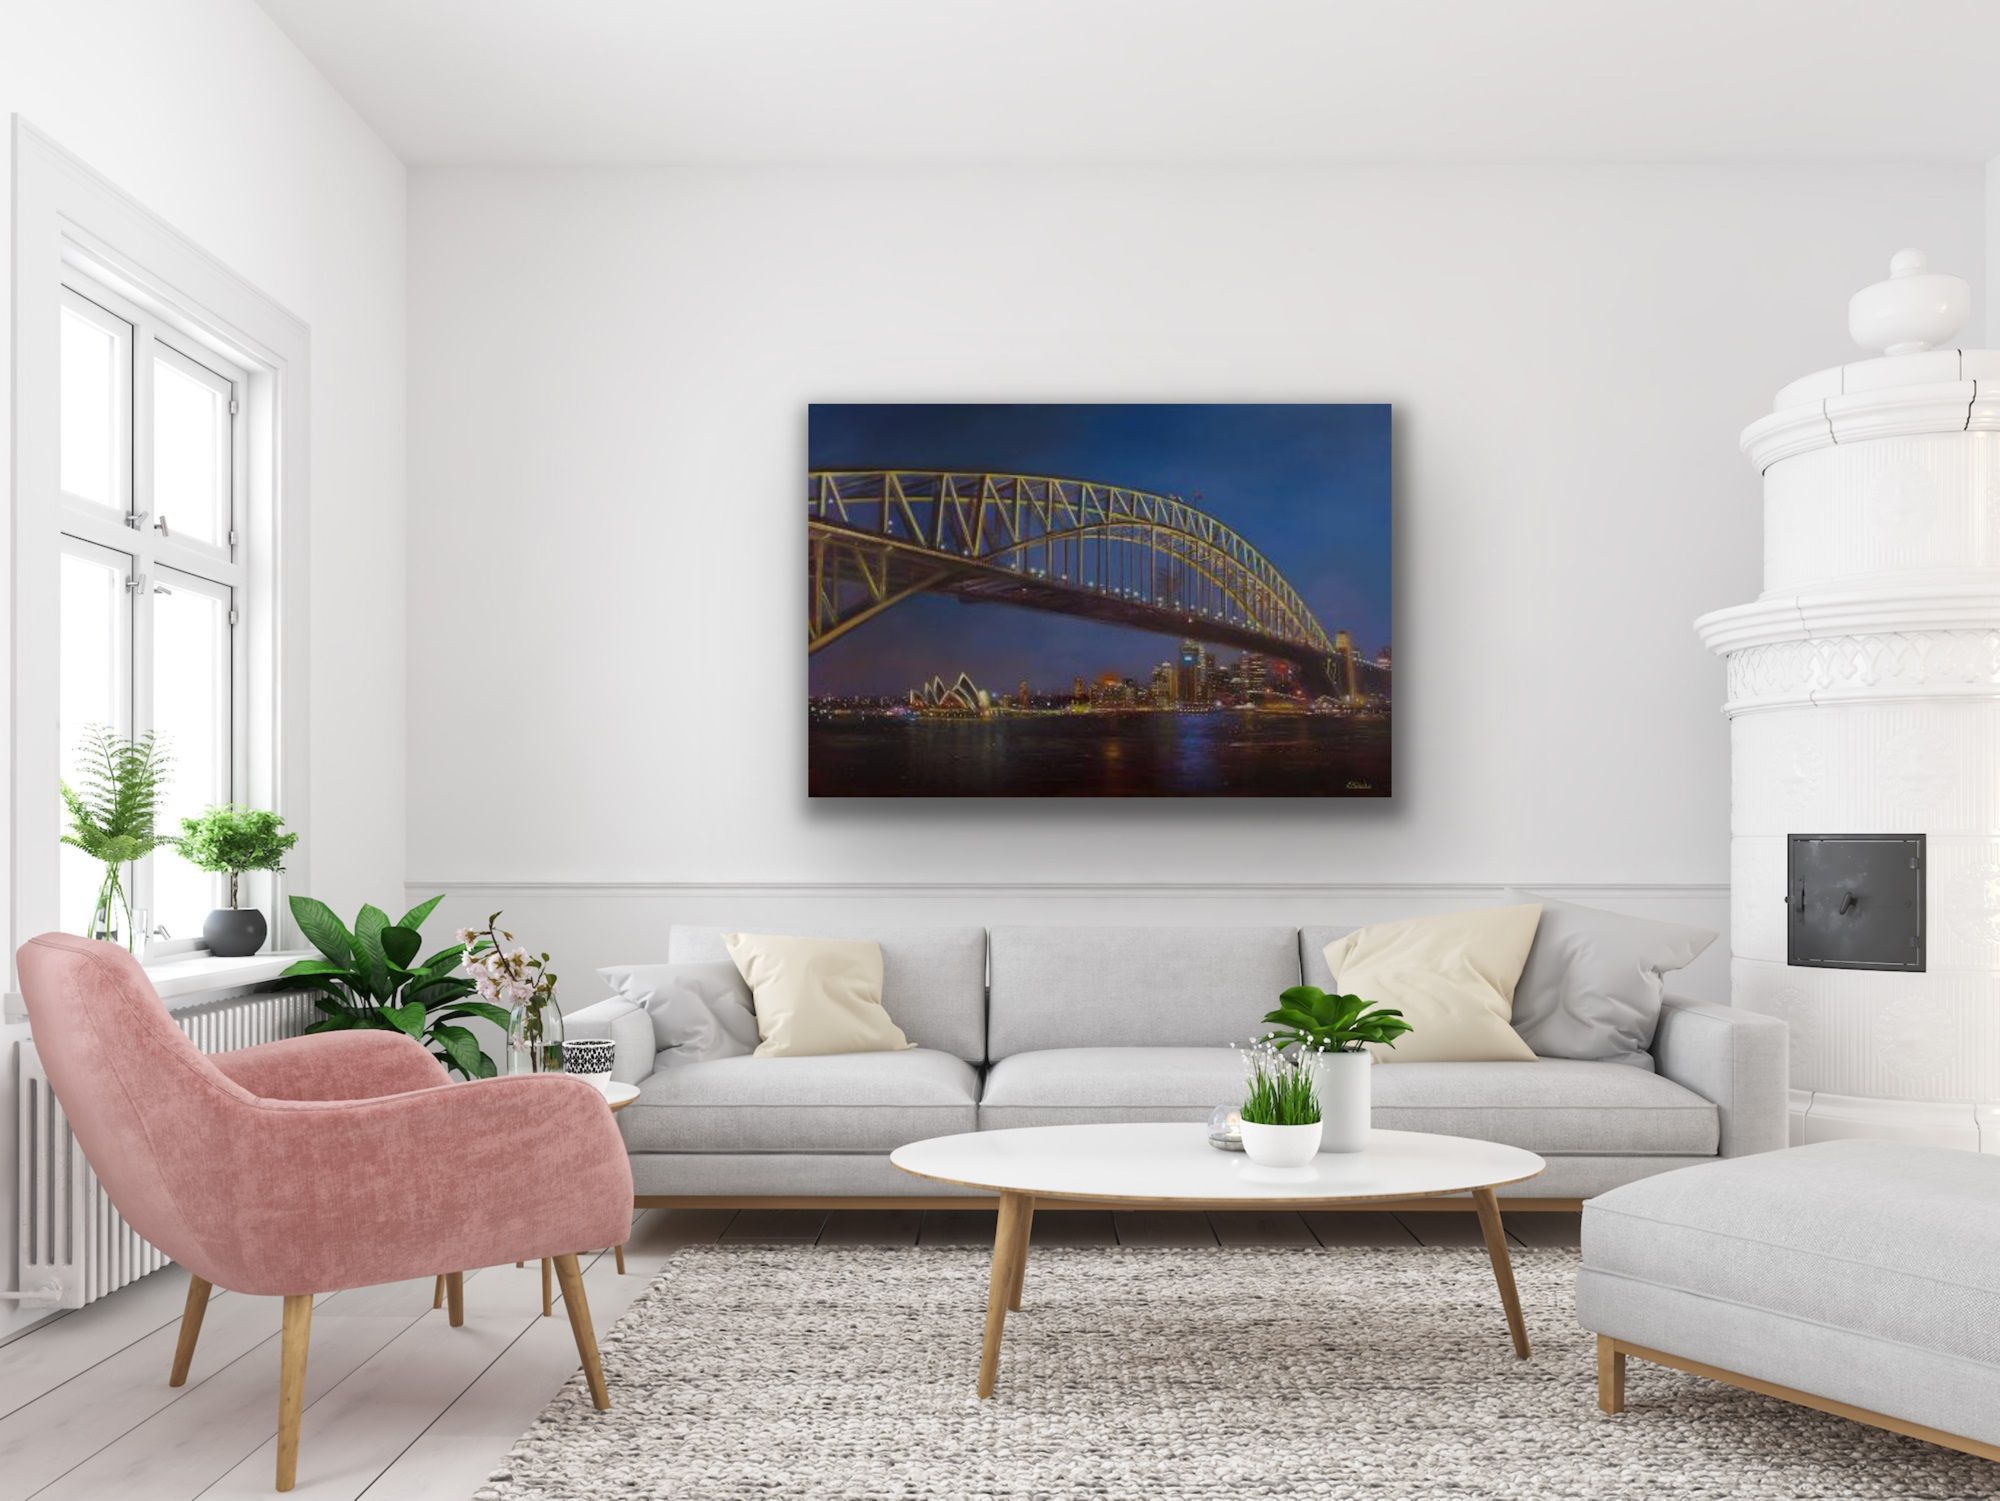 Sydney by Lesley Anne Derks - Secondary Image